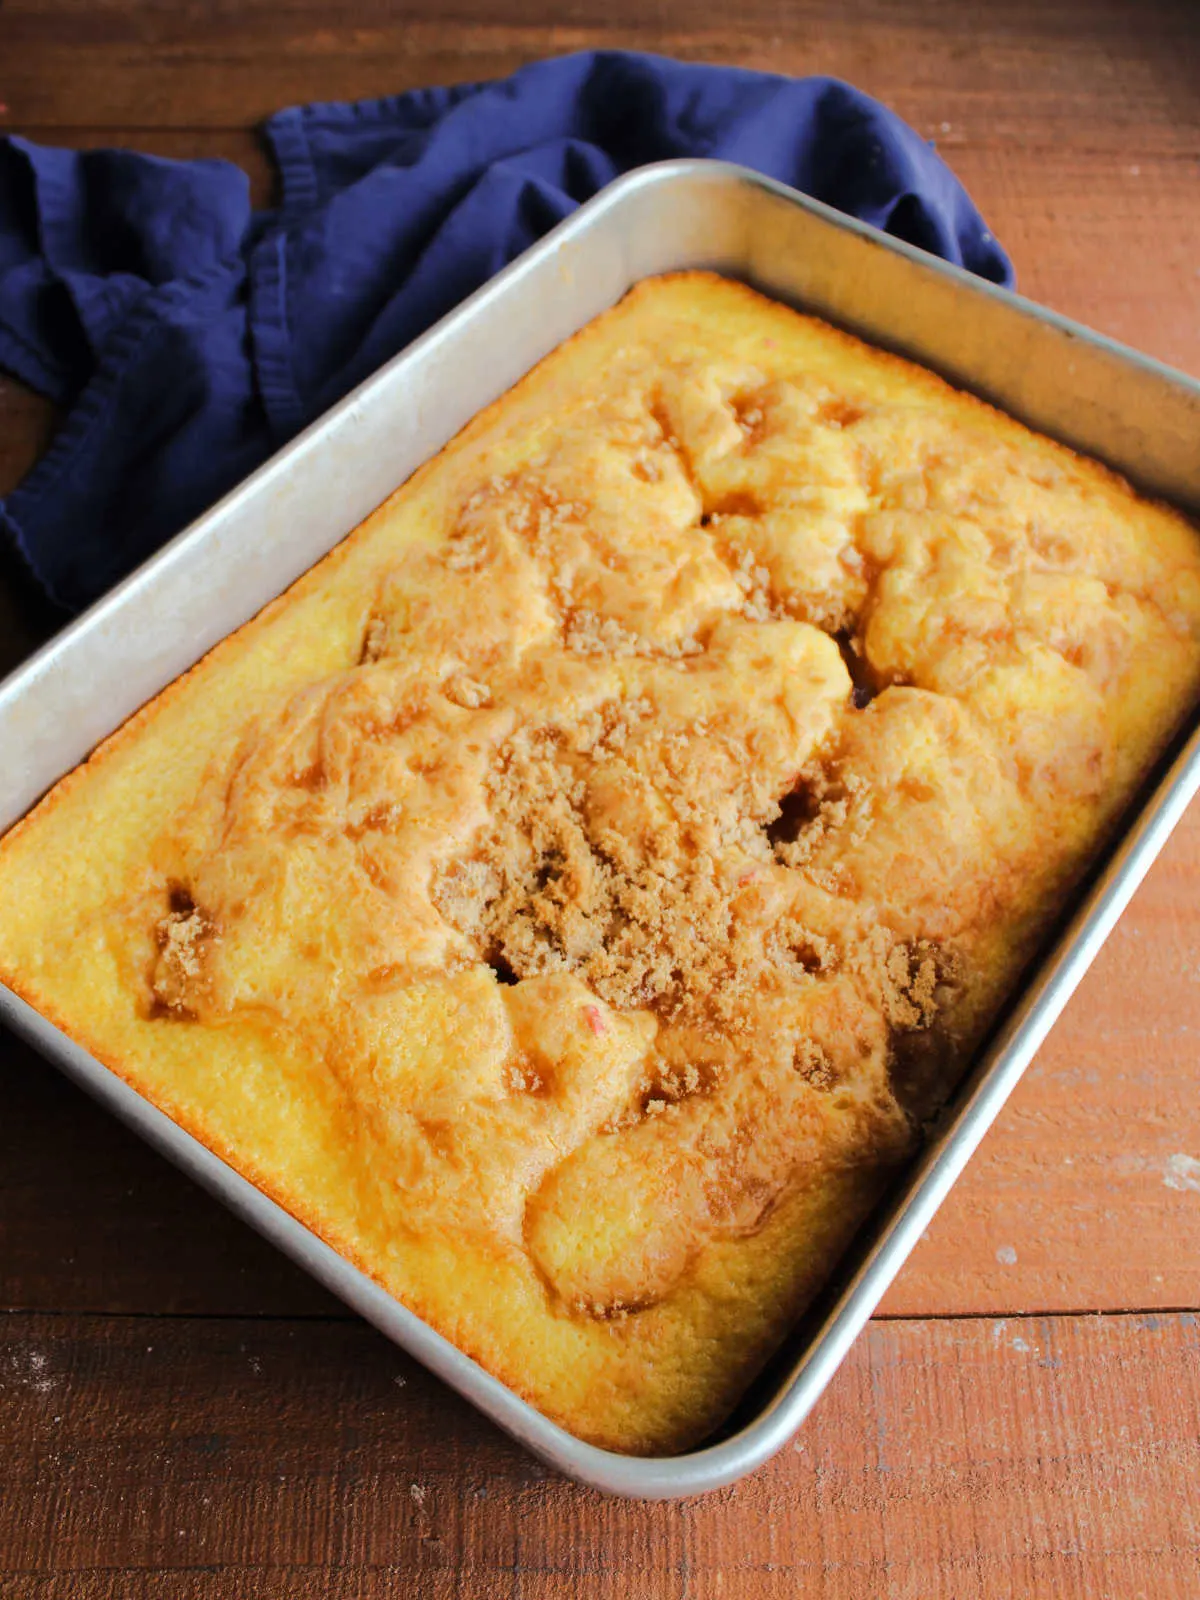 Freshly baked cake mix fruit cocktail cake with golden brown sugar topping.